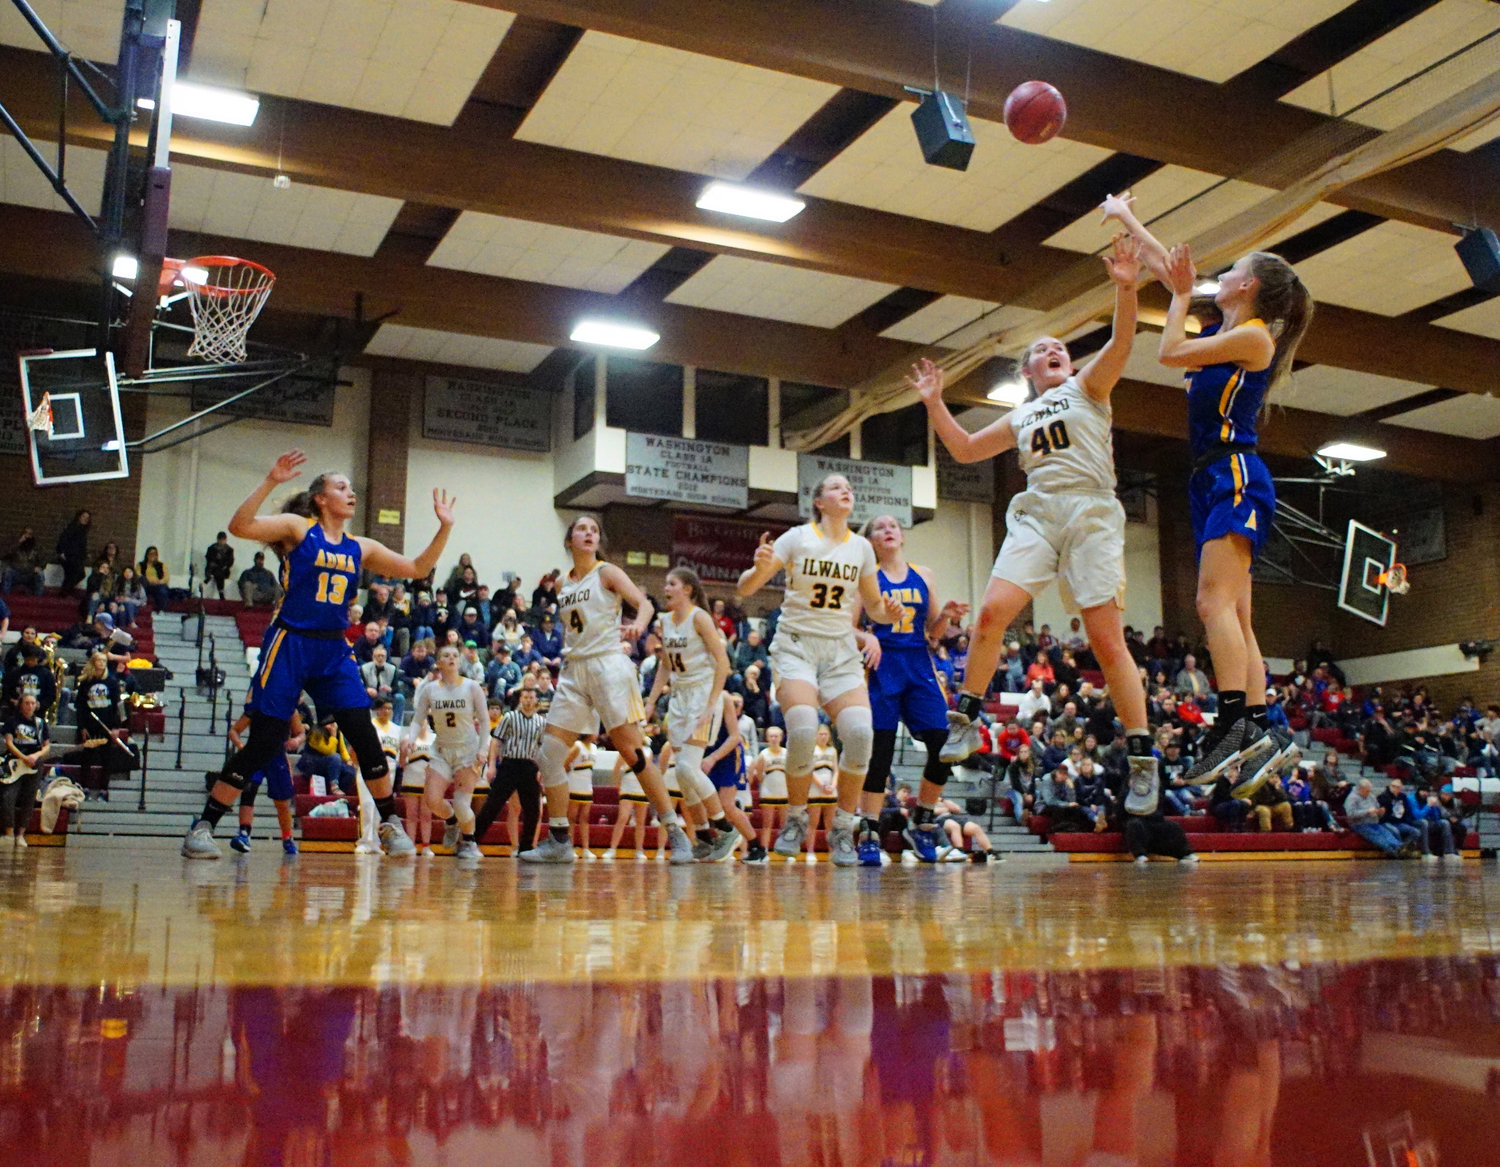 An Adna player rises for a jumper against Ilwaco during the Pirates' 42-26 loss to the Fishermen on Saturday. (Rob Hilson / For The Chronicle)